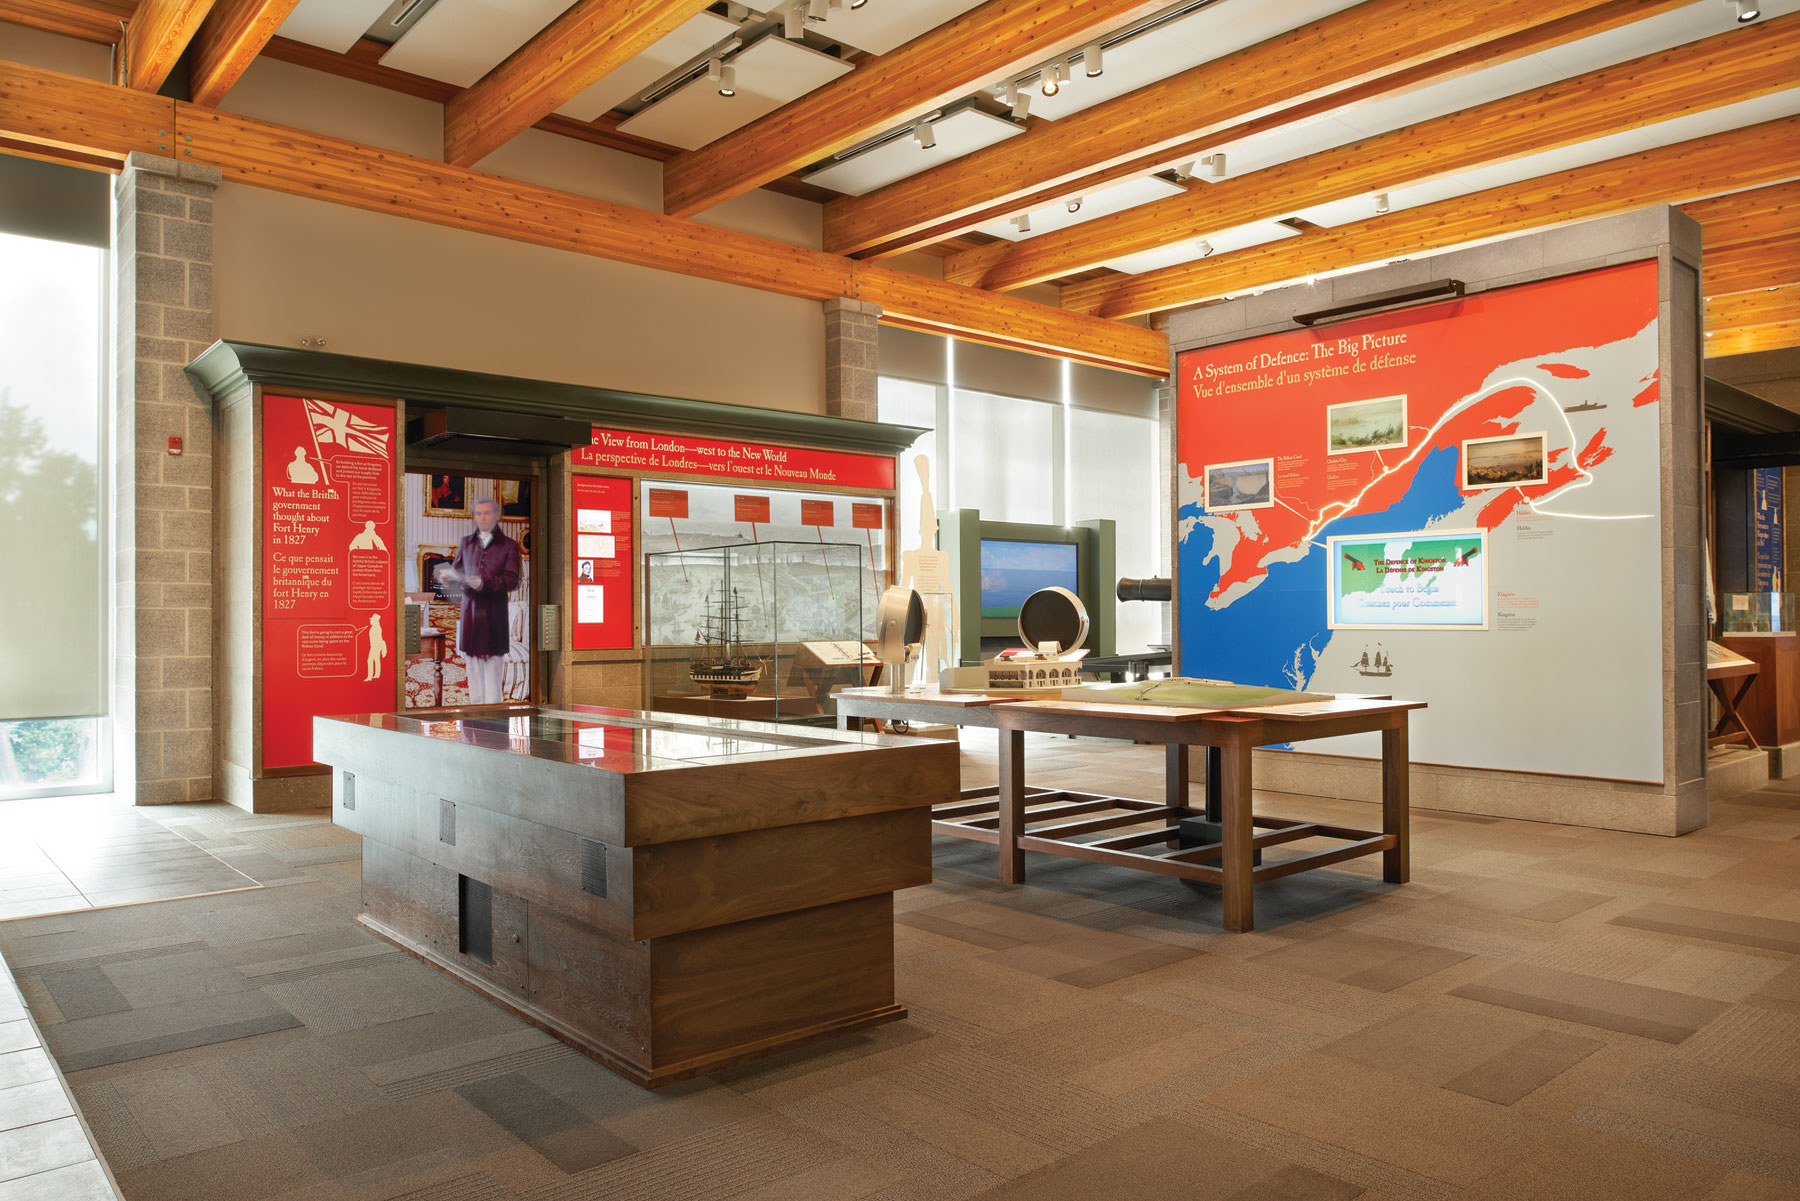 Exhibit space with floor and wall displays, stone wall on left and wood rafter ceilings